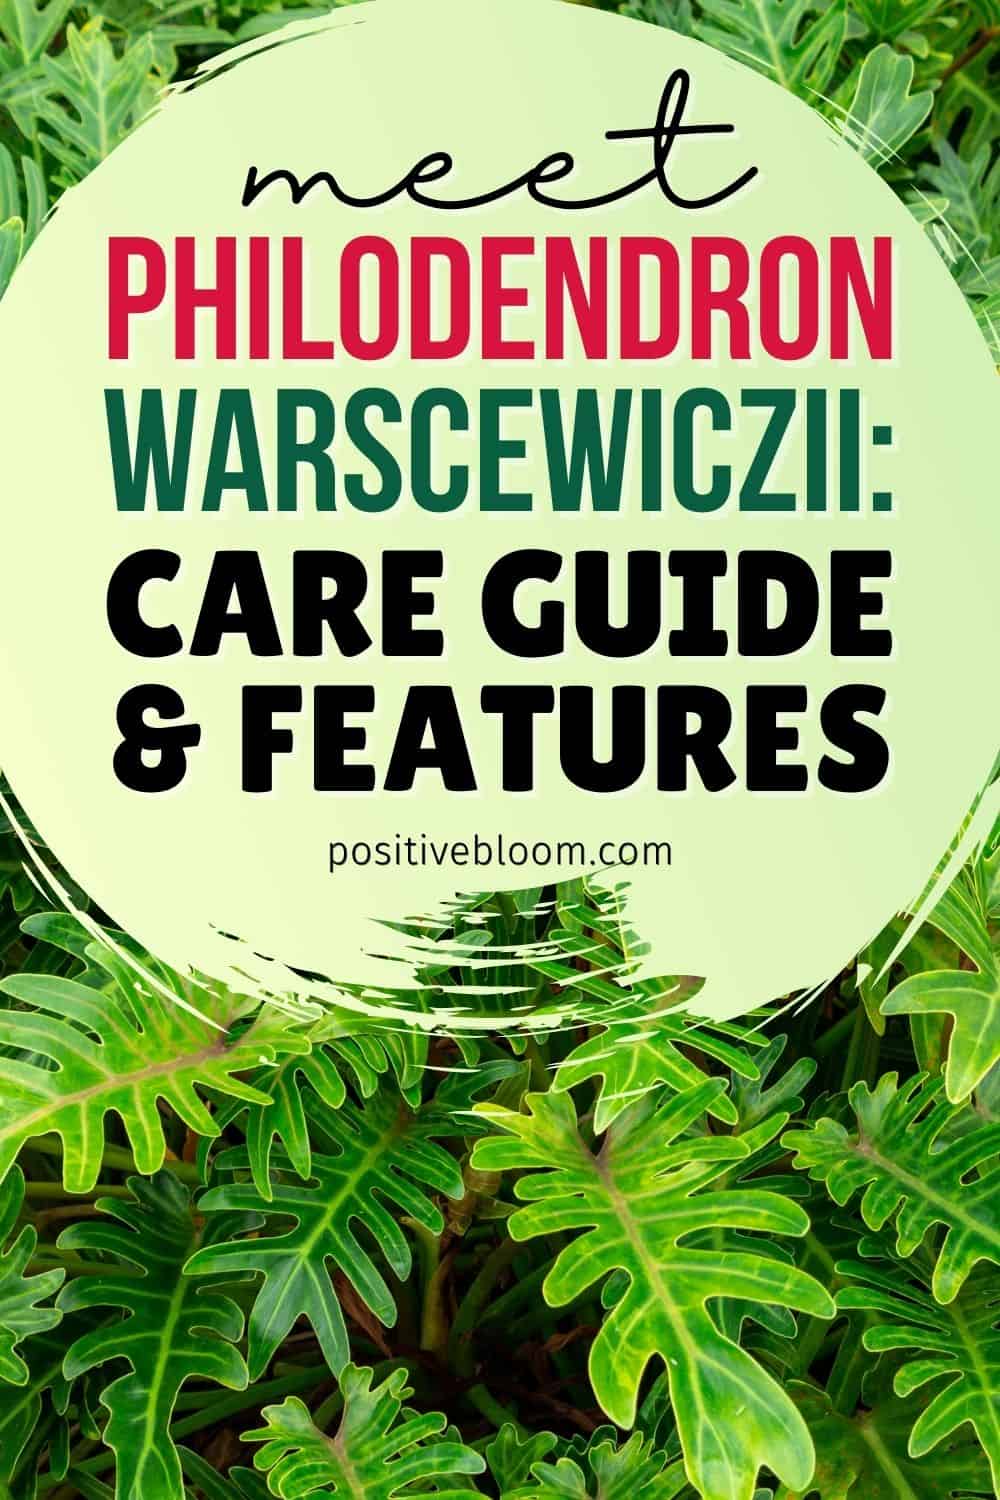 Meet Philodendron Warscewiczii: Care Guide And Features